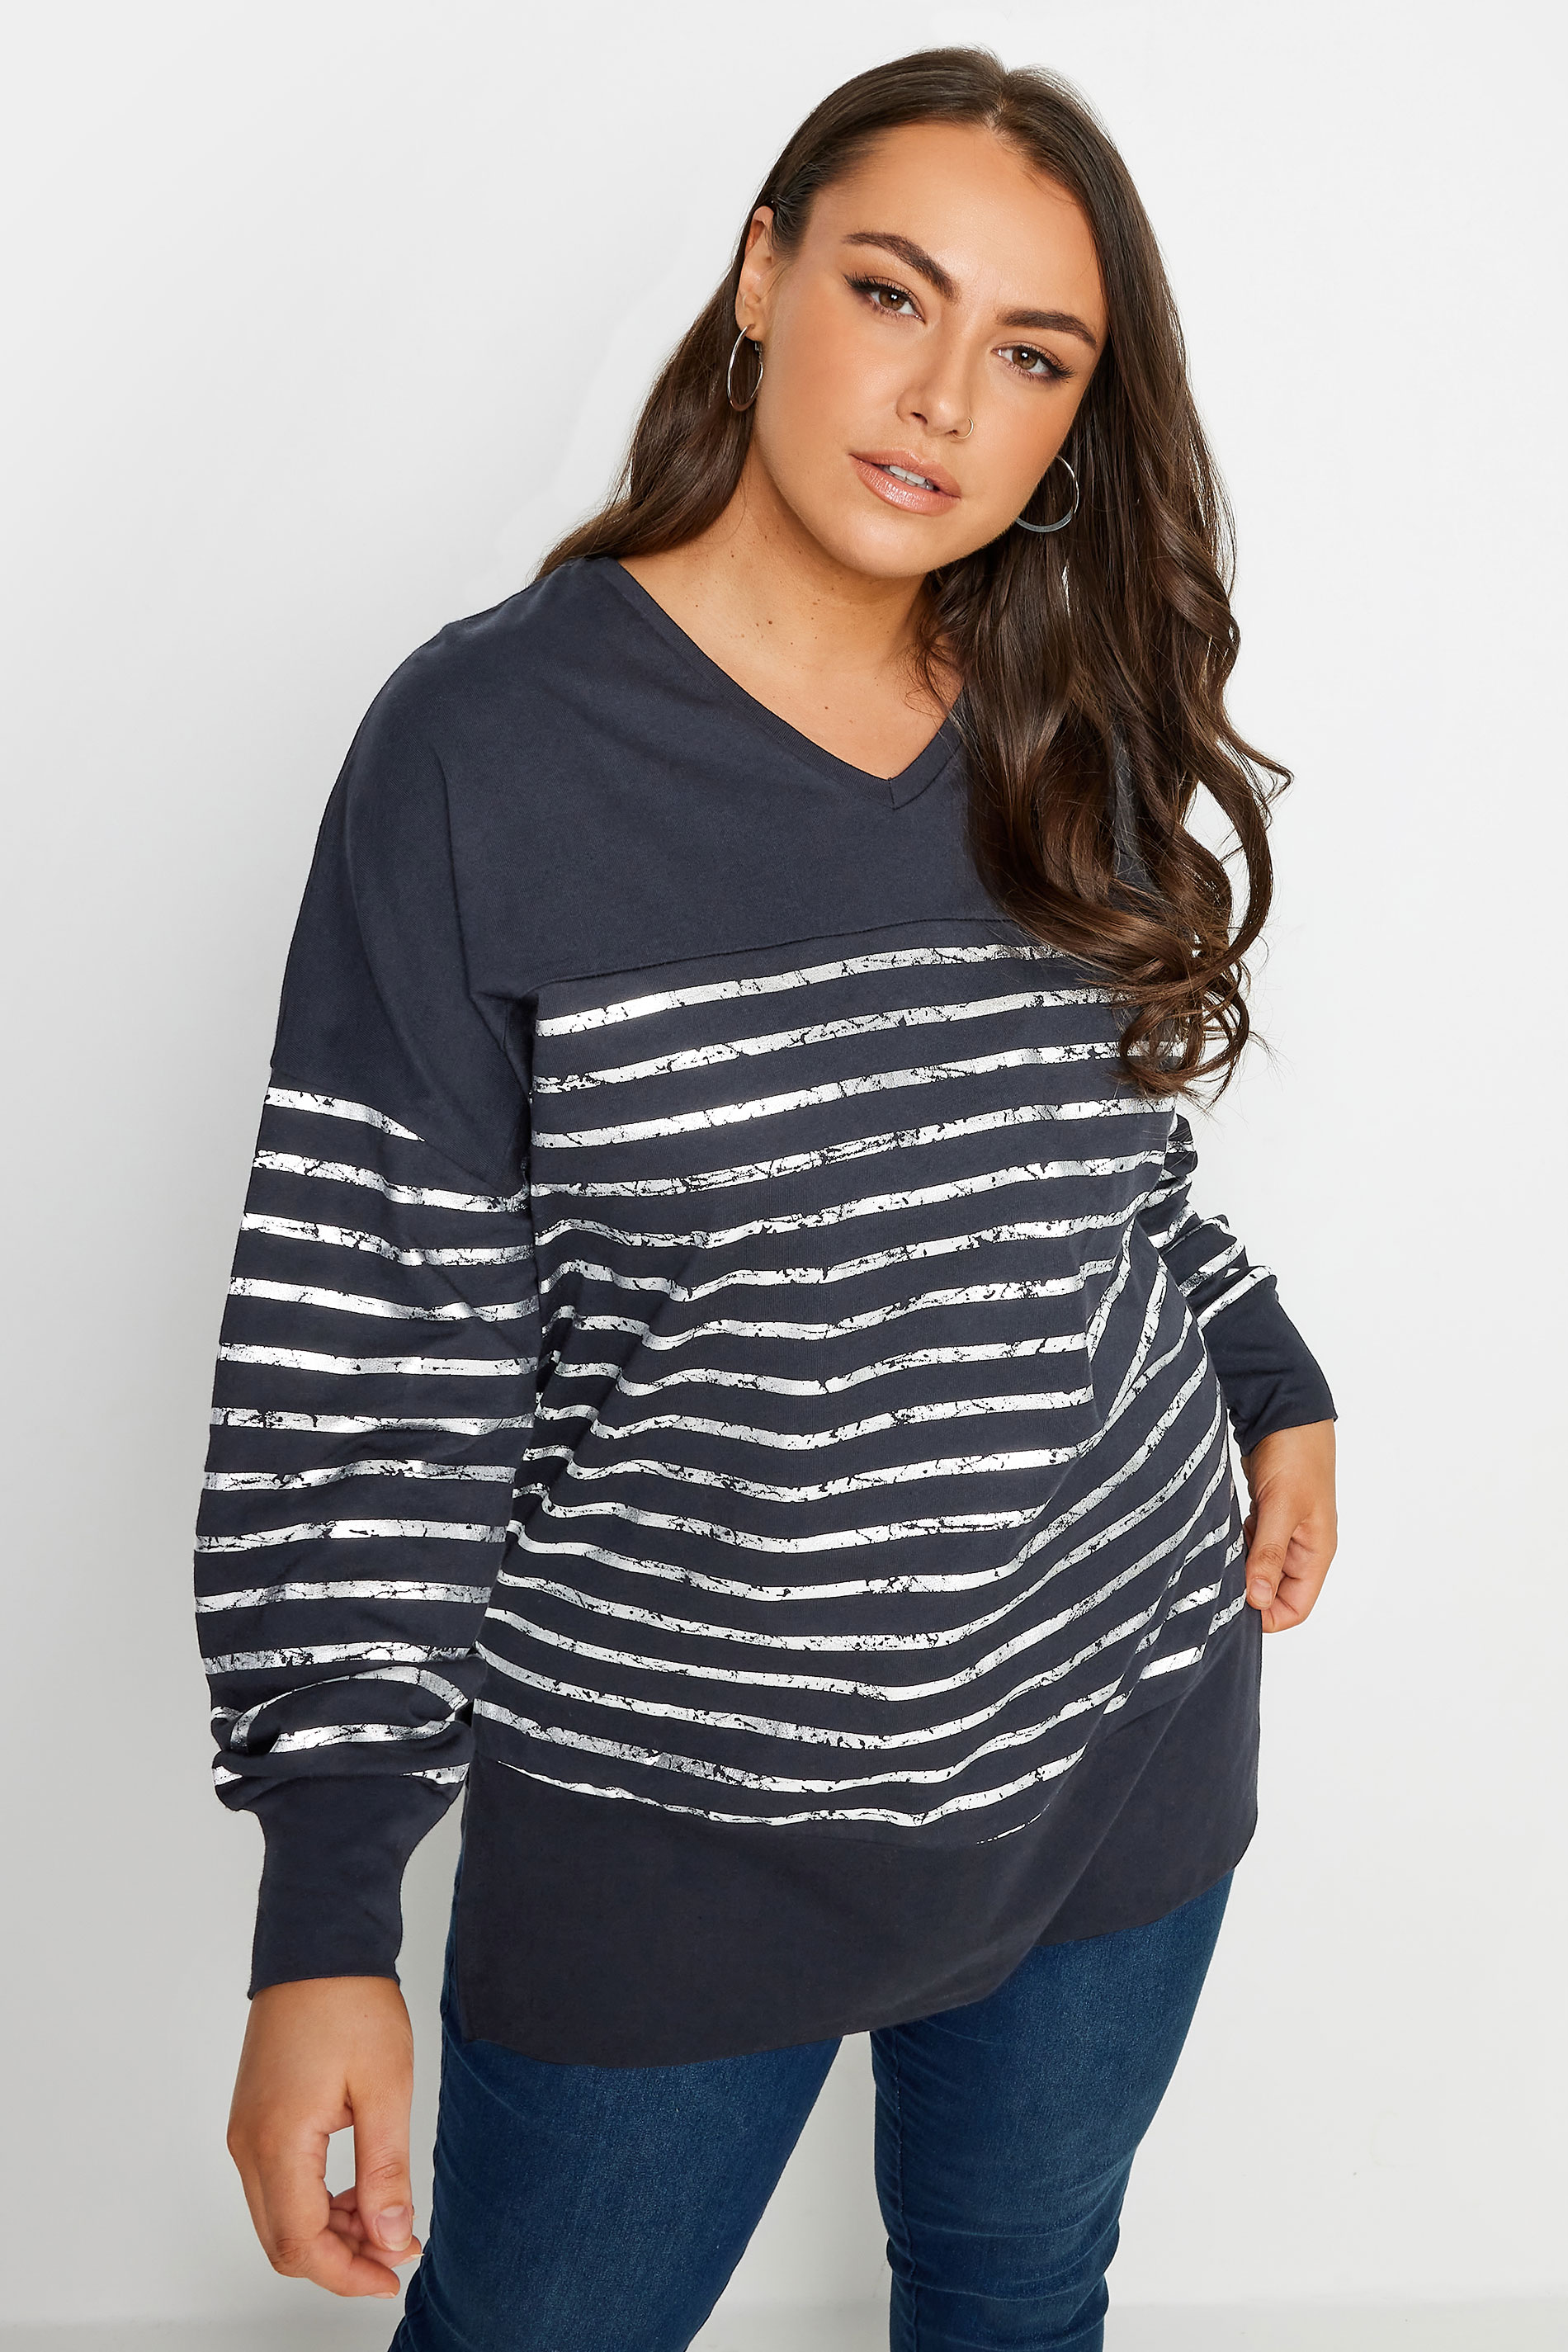 YOURS LUXURY Plus Size Navy Blue Metallic Stripe Top | Yours Clothing 1